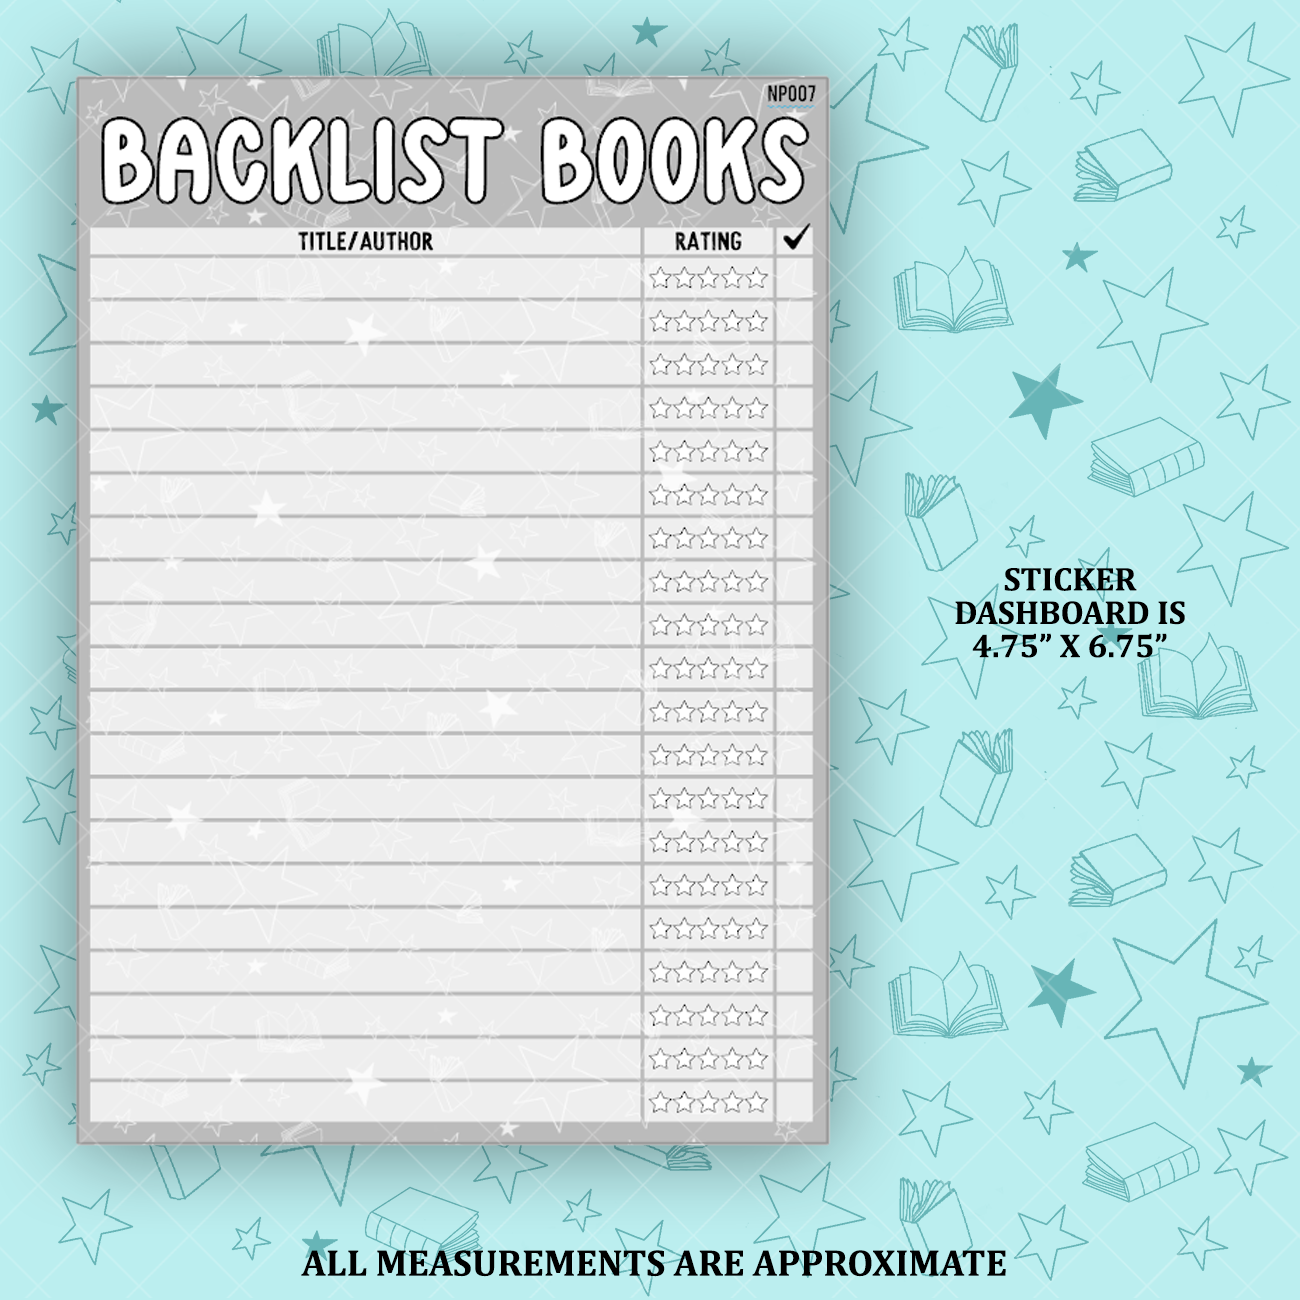 Book Backlist Notes Page Sticker Dashboard - NP007